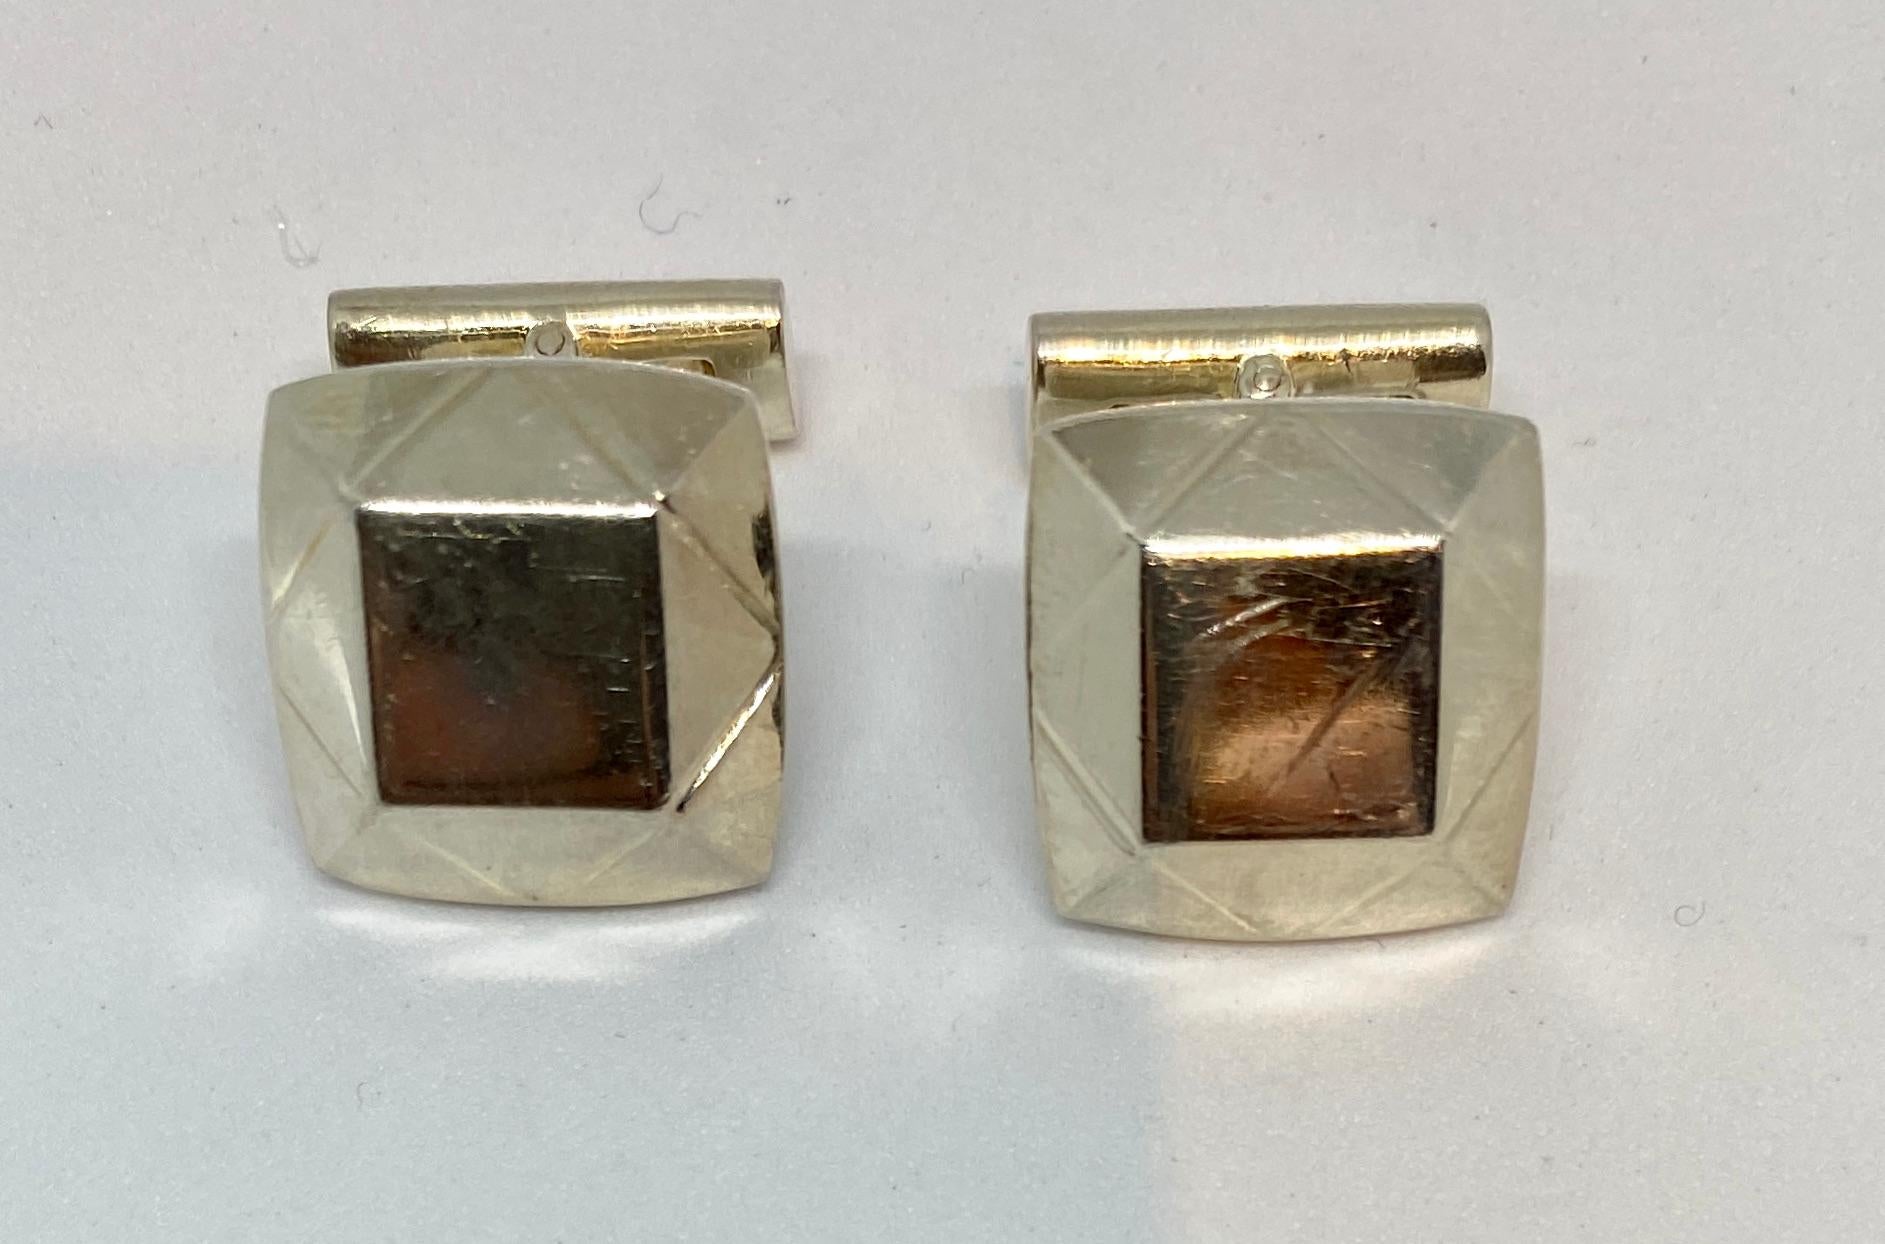 A rare pair of cufflinks in a geometric design by Asprey London.

The cufflink faces measure 16.7mm square and bear hallmarks for the London Assay Office, the year 2002 and 925 indicating solid sterling silver. They feature toggle backs and together